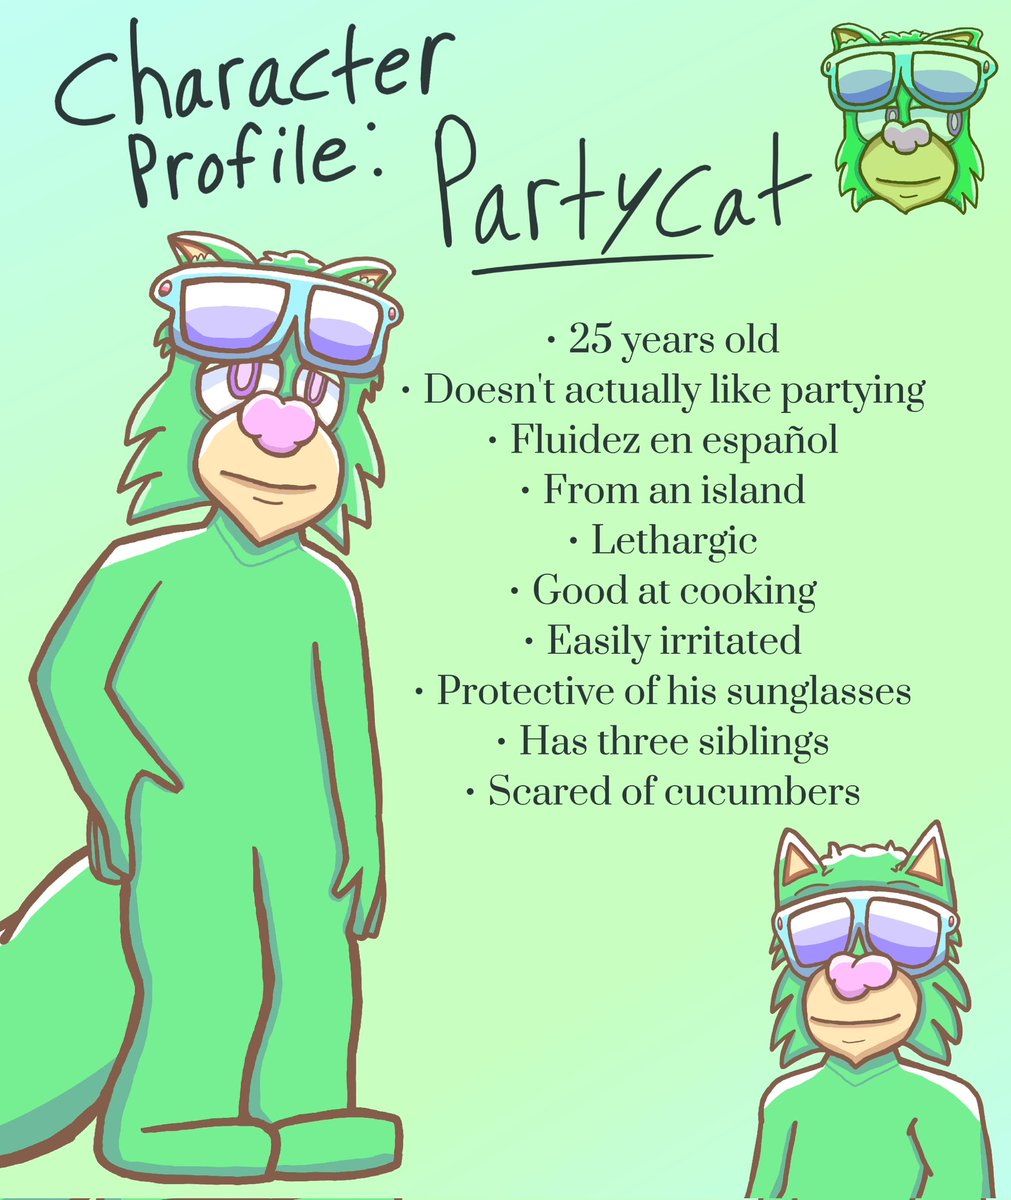 For the sixth character profile, we've got the former king of Party Kingdom, and the team's resident snoozer: Partycat!

Odia que lo despierten.